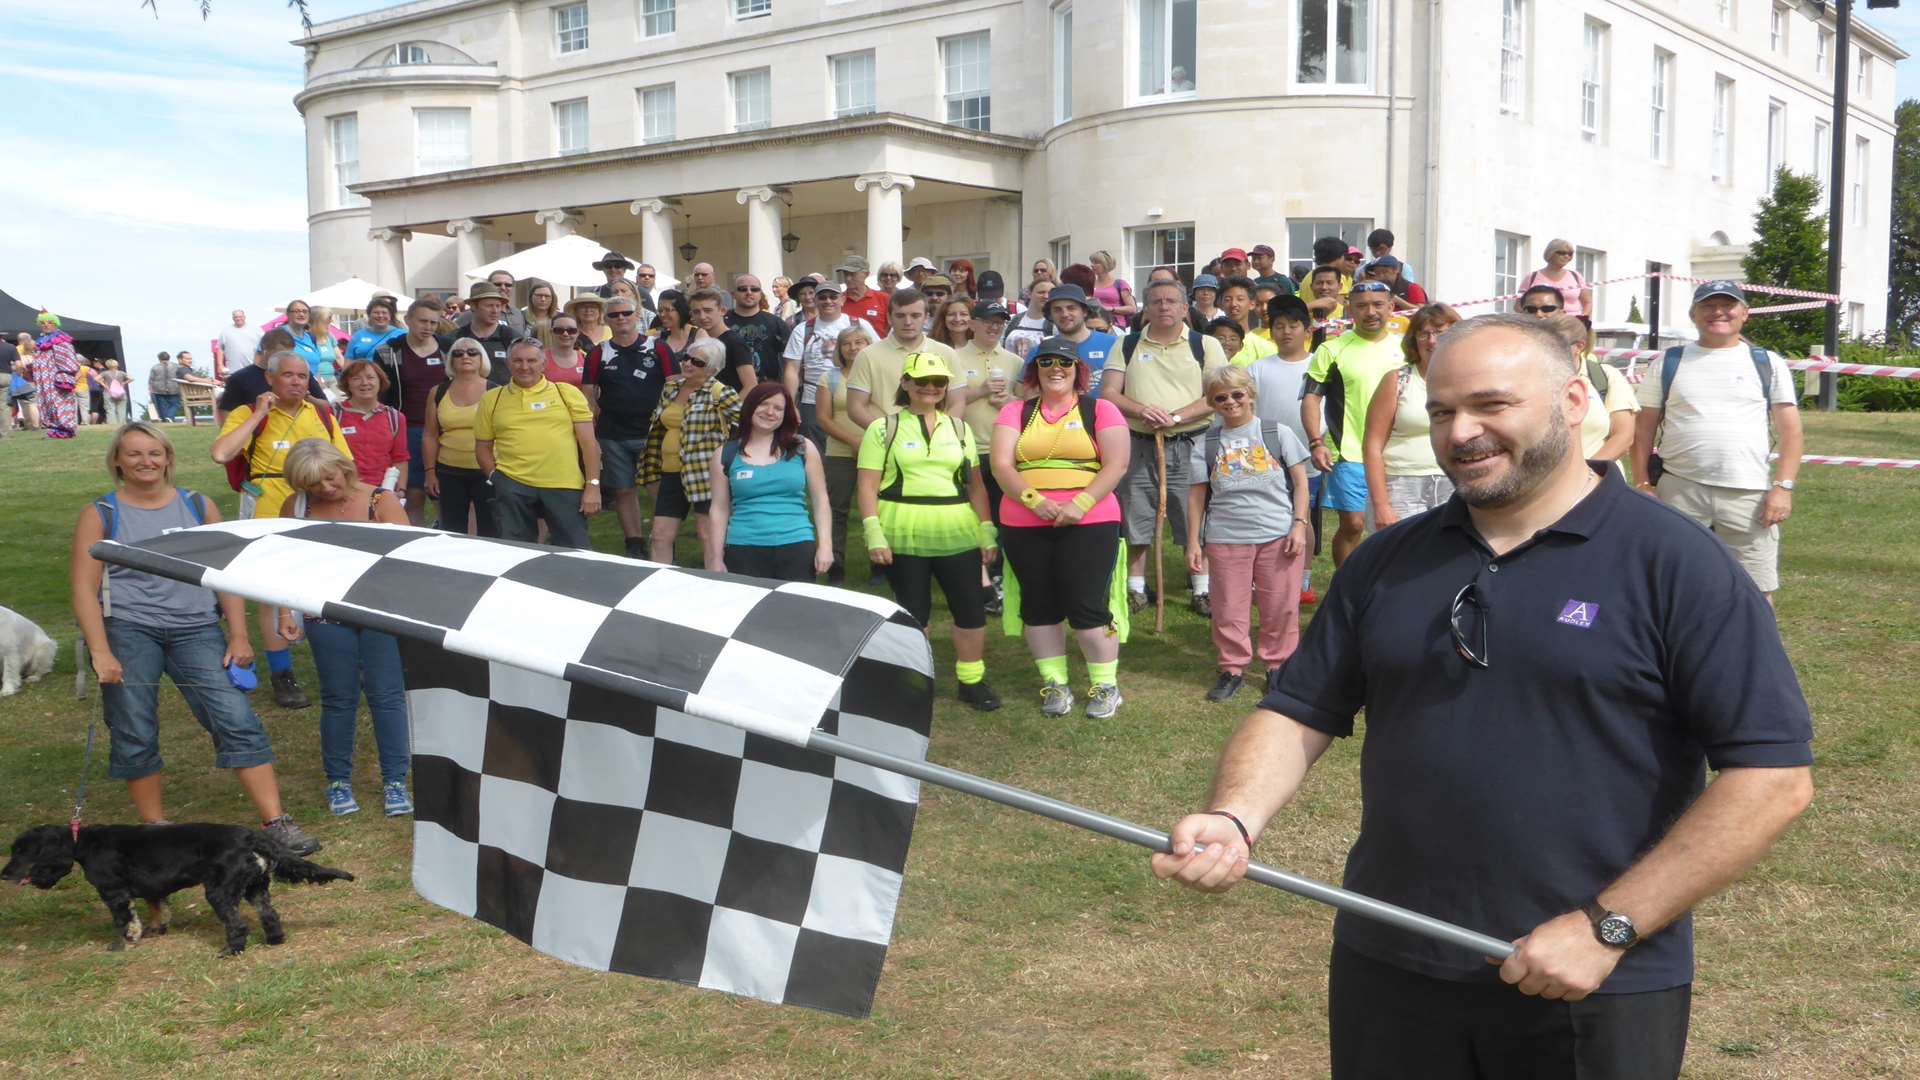 Shayne Brown, facilities manager at Mote House, starts the 20th anniversary KM Charity Walk. More than 400 walkers took part raising £20,000.